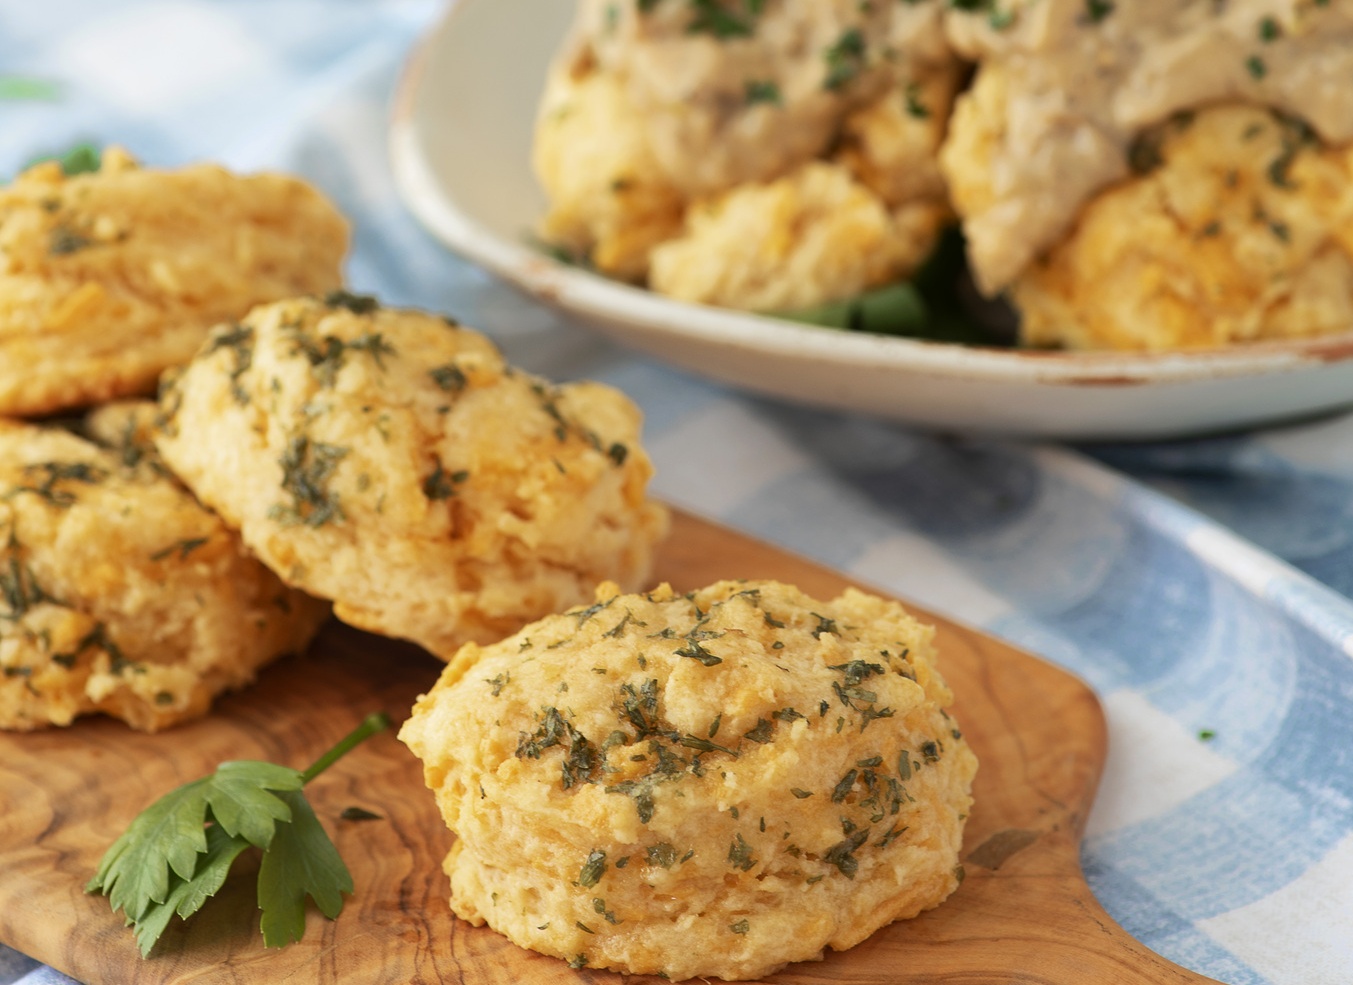 Cheddar and Garlic Biscuits with Sausage Sauce